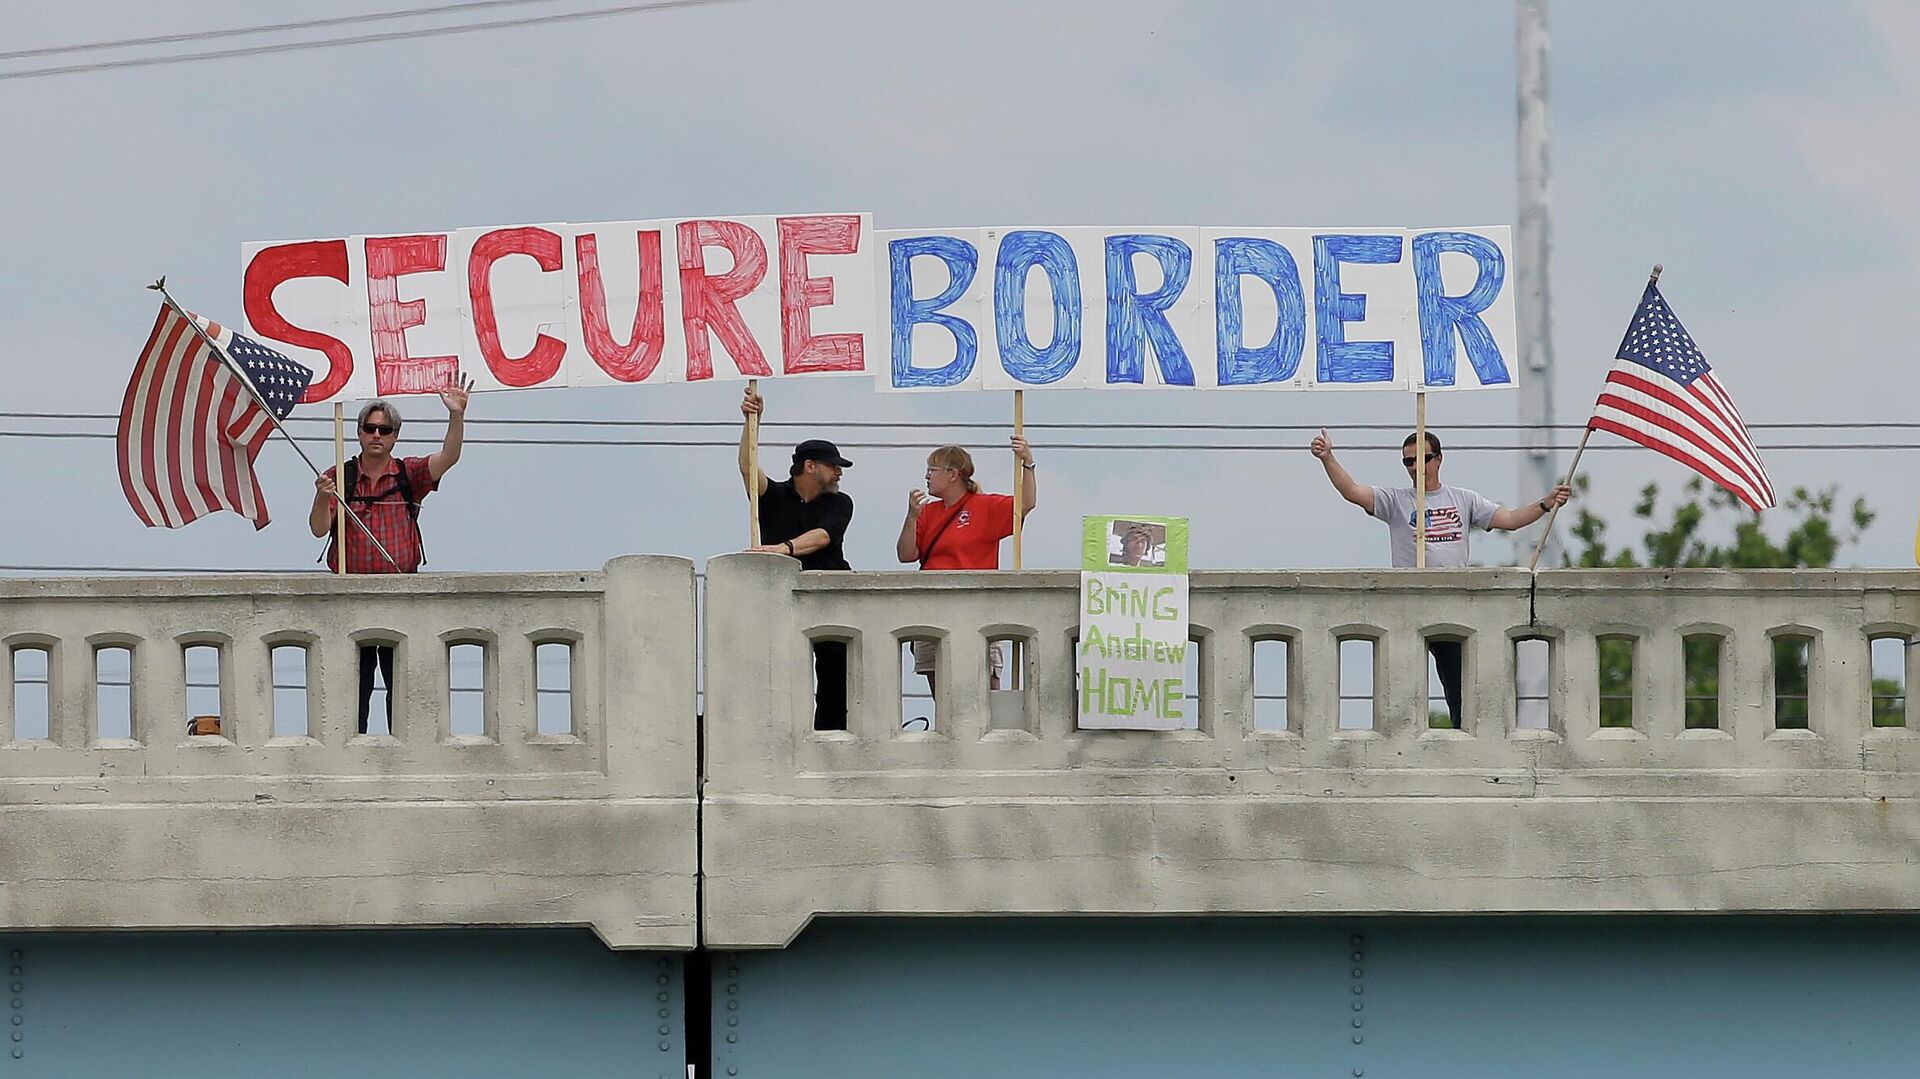 This July 18, 2014, file photo shows demonstrators with signs on an overpass in Indianapolis, to protest against people who immigrate illegally. Even as they grapple with an immigration crisis at the border, White House officials are making plans to act before November’s mid-term elections to grant work permits to potentially millions of immigrants in this country illegally, allowing them to stay in the United States without threat of deportation, according to advocates and lawmakers in touch with the administration. (AP Photo/Darron Cummings, File) - Sputnik International, 1920, 10.08.2022